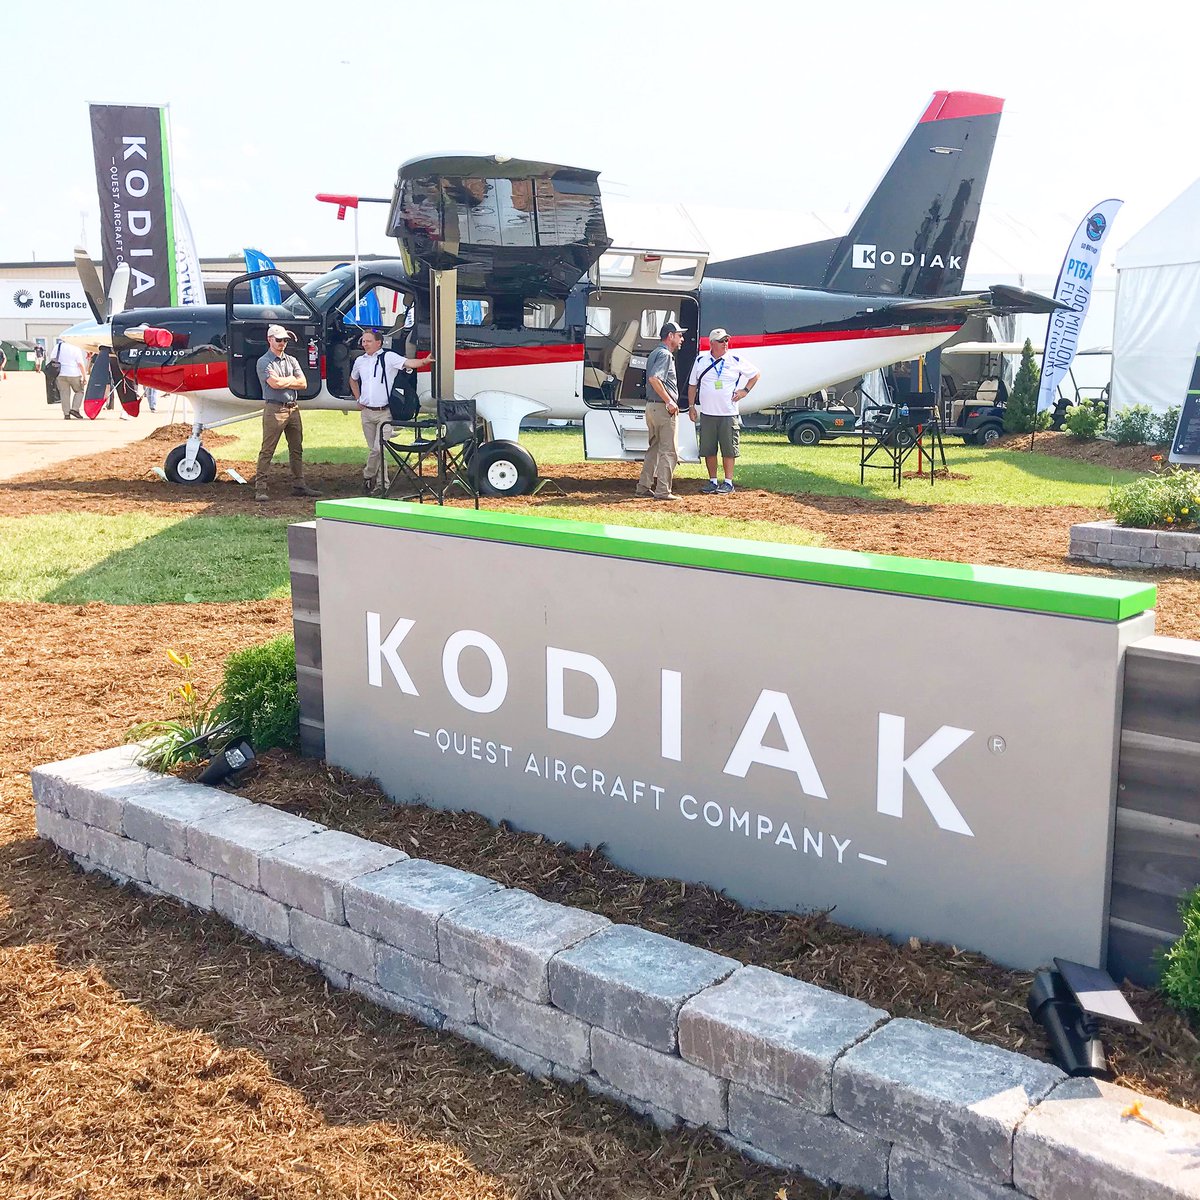 Just like many of you, we’re looking back at our OSH memories this week - this is from osh19, with our Kodiak demonstrator displayed in the booth.
#EAAtogether